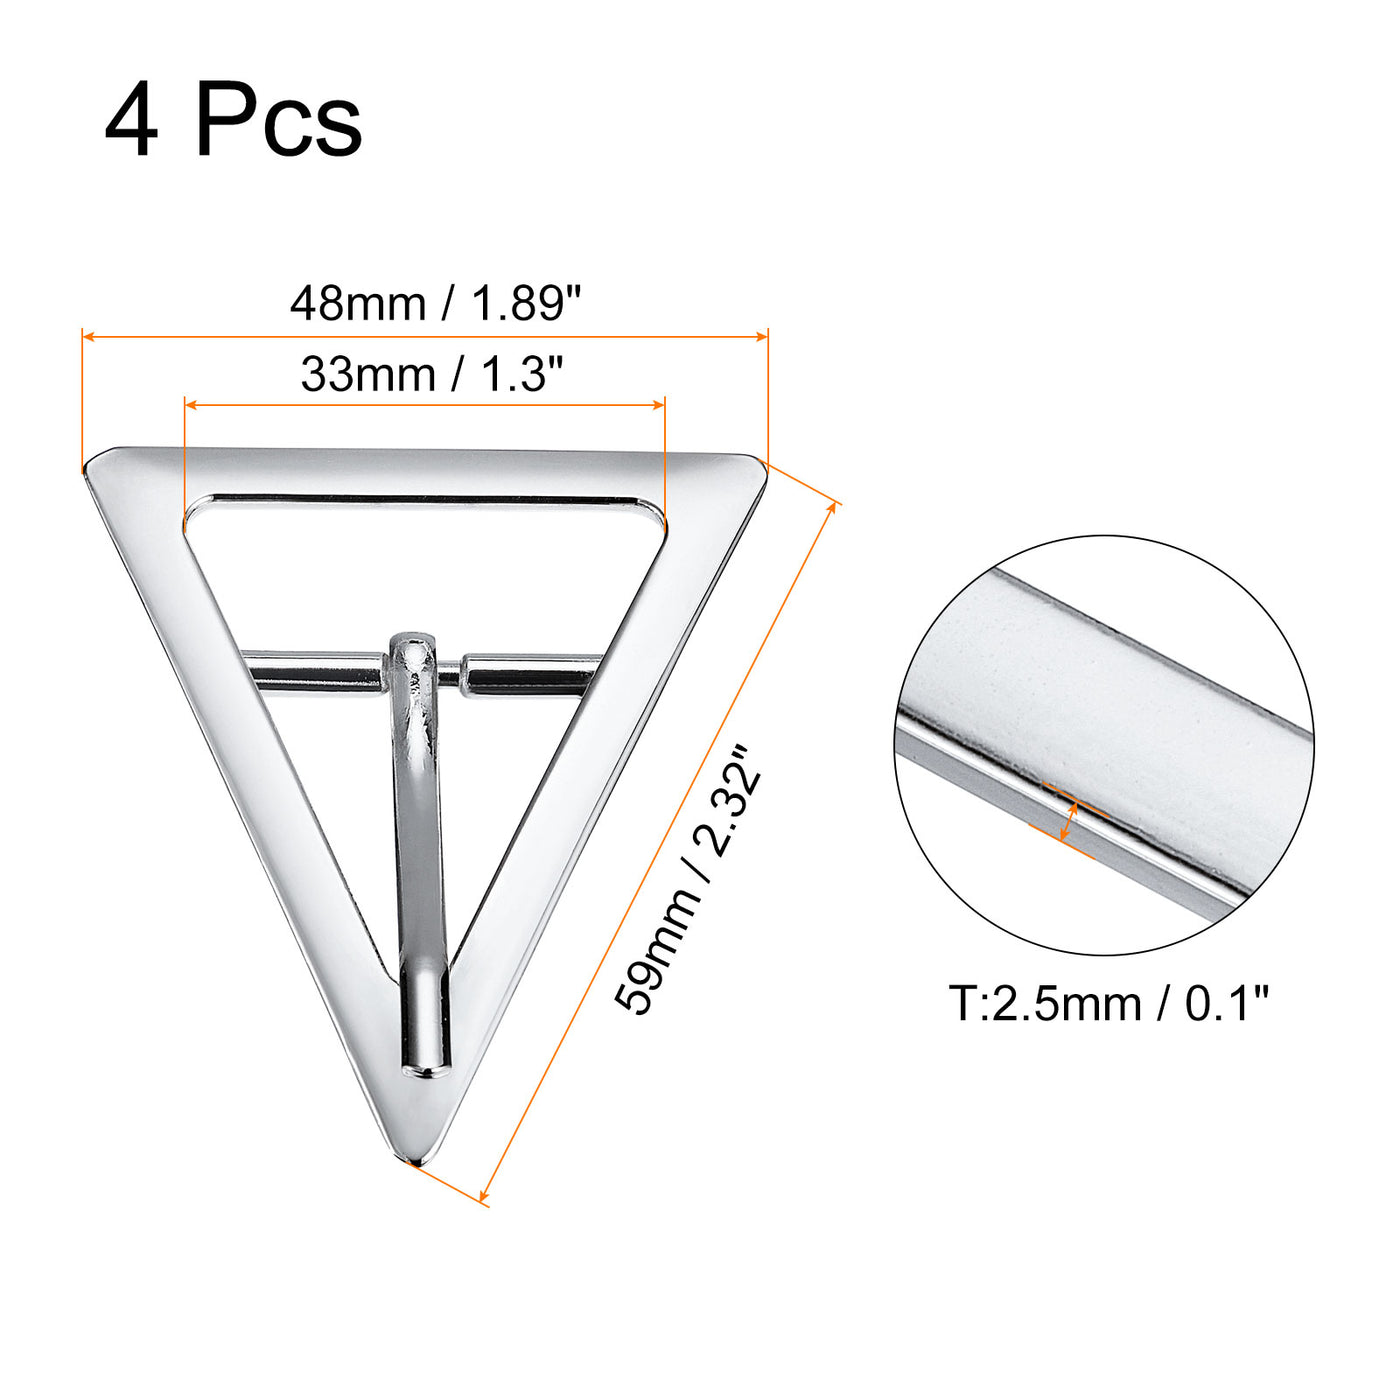 uxcell Uxcell 4Pcs 1.3" Single Prong Belt Buckle Triangle Center Bar Buckles for Belt, White